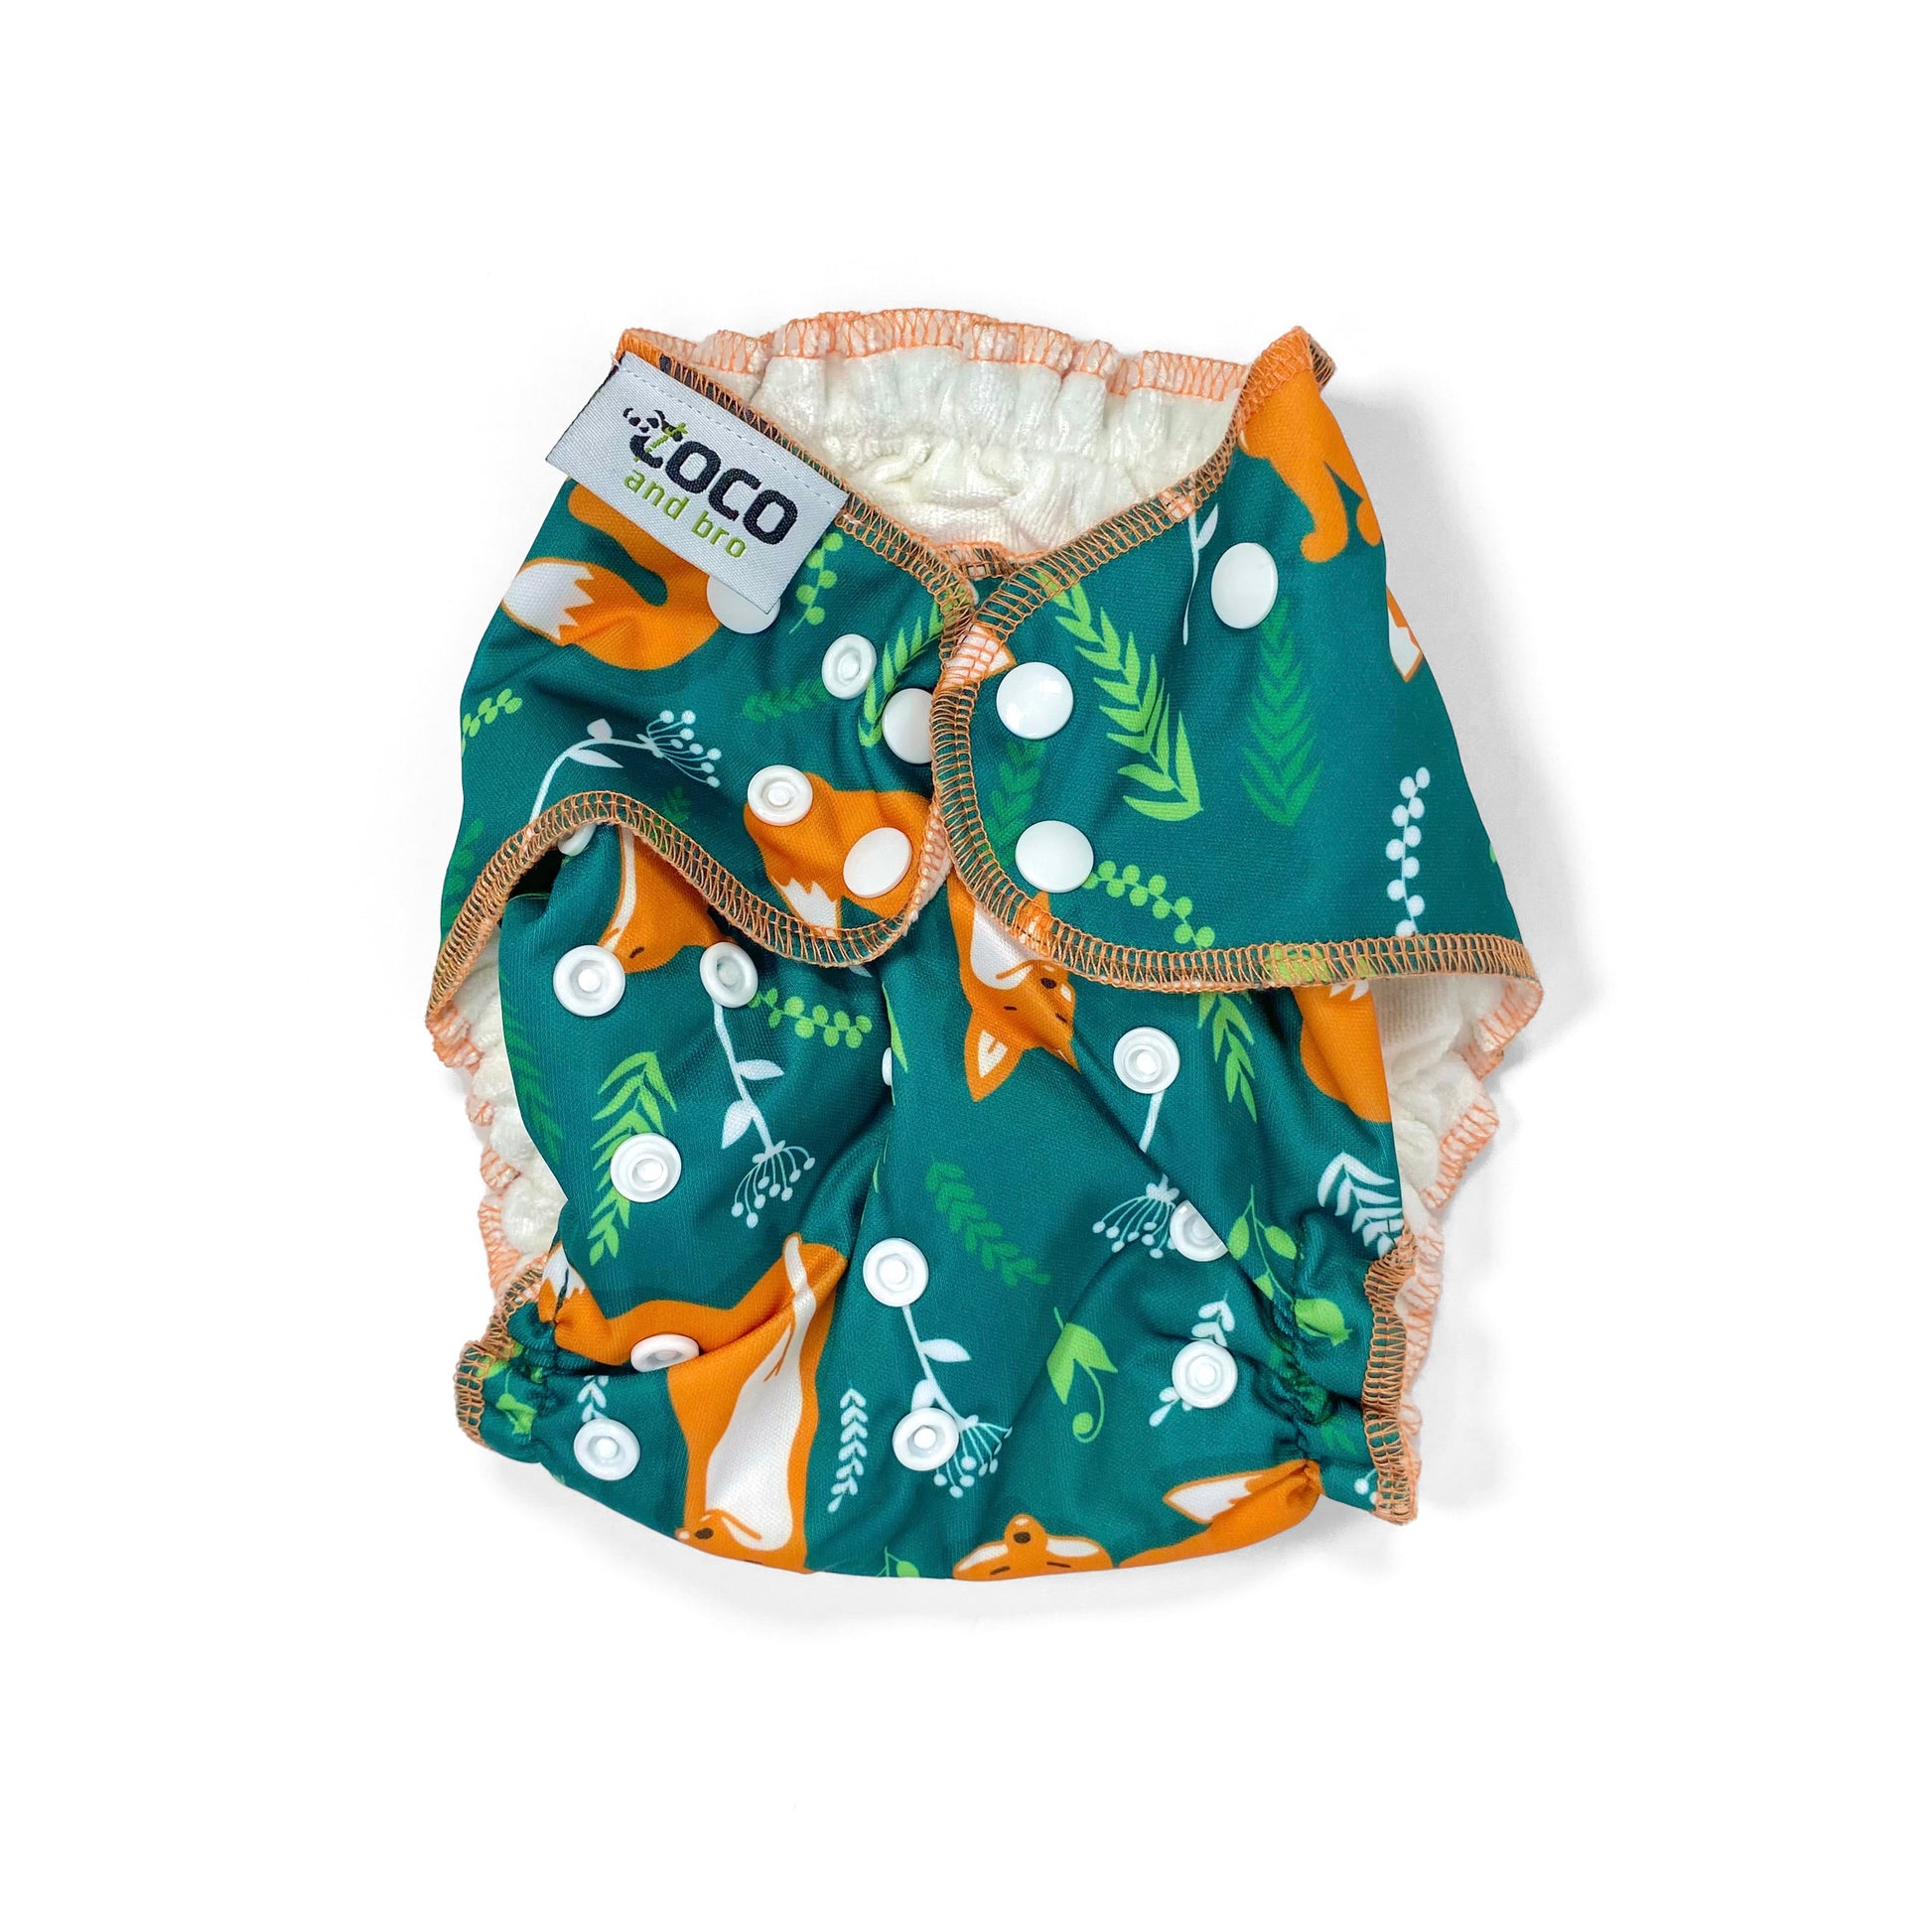 An adjustable reusable nappy for babies and toddlers, featuring a green fox design, with images of foxes on a green background. View shows the front of the nappy.